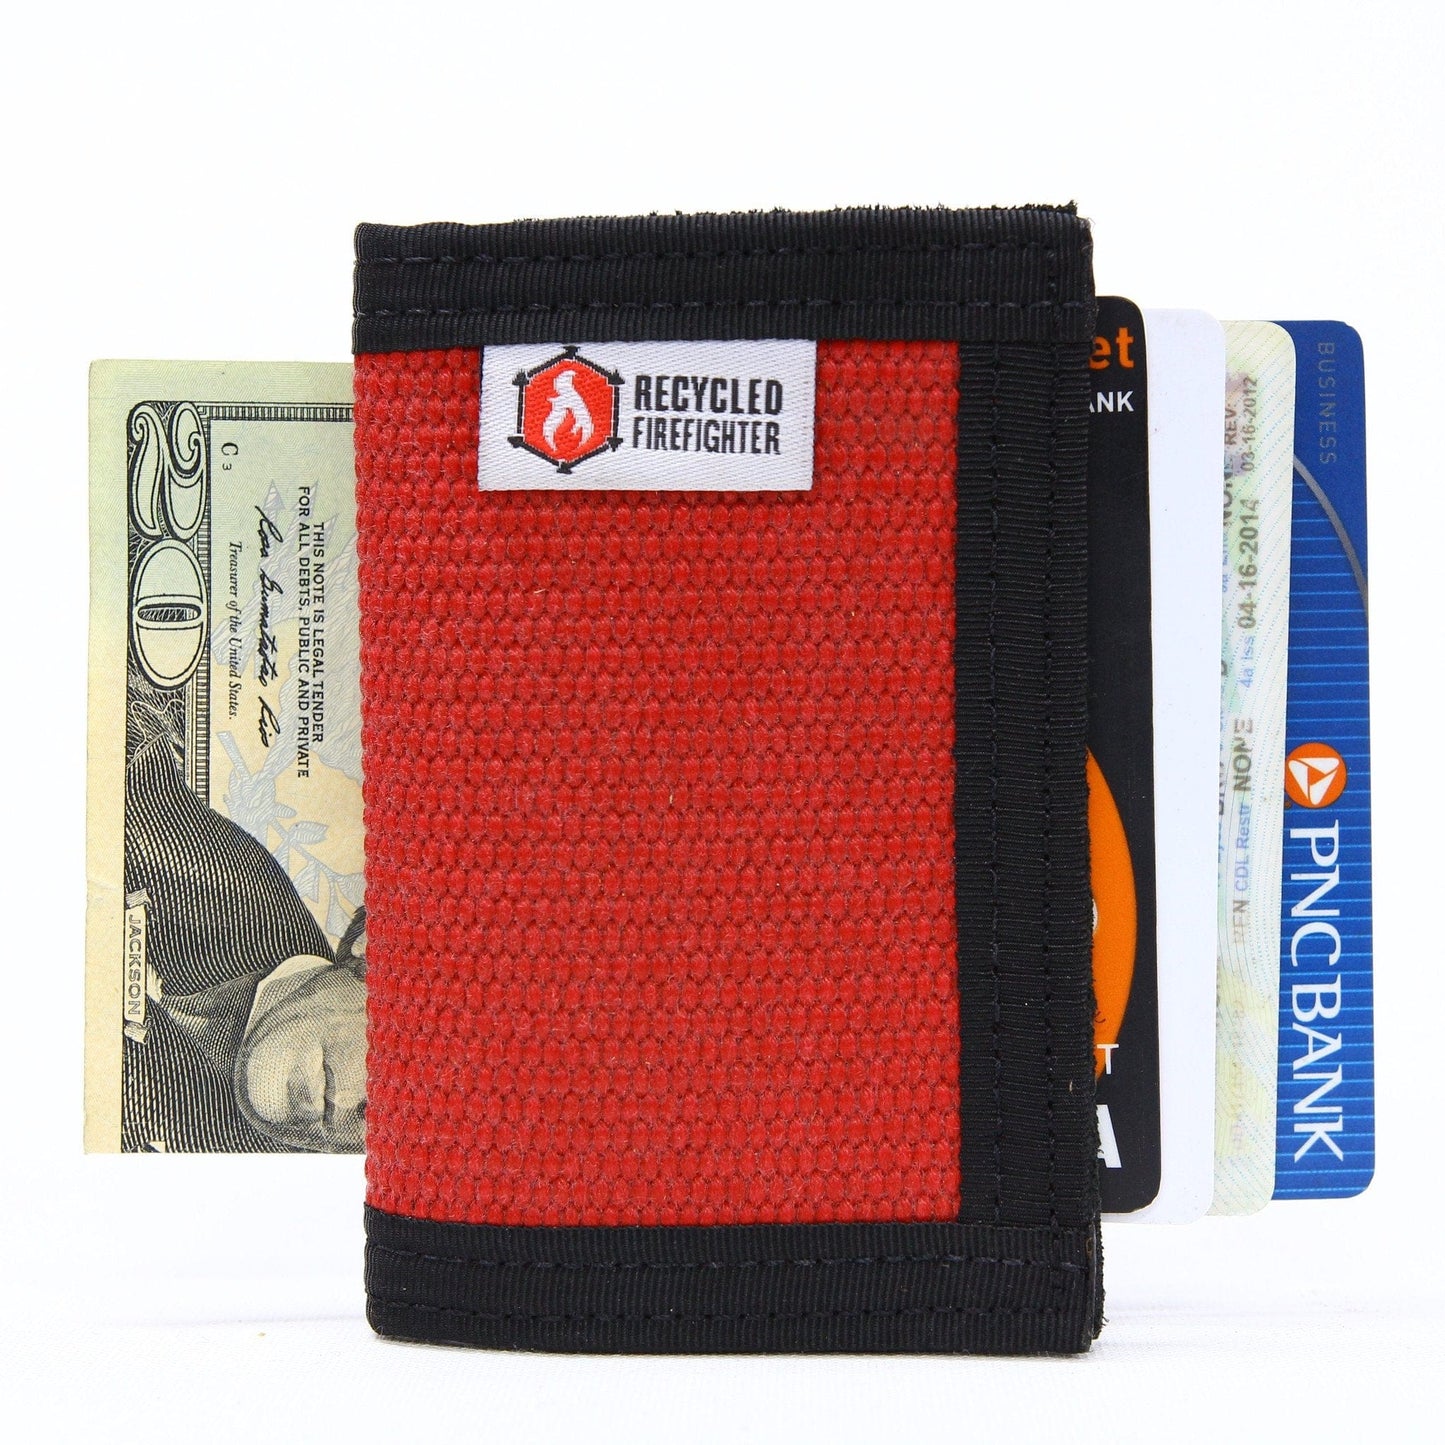 Chief Miller Wallet "The Rookie" Apparel